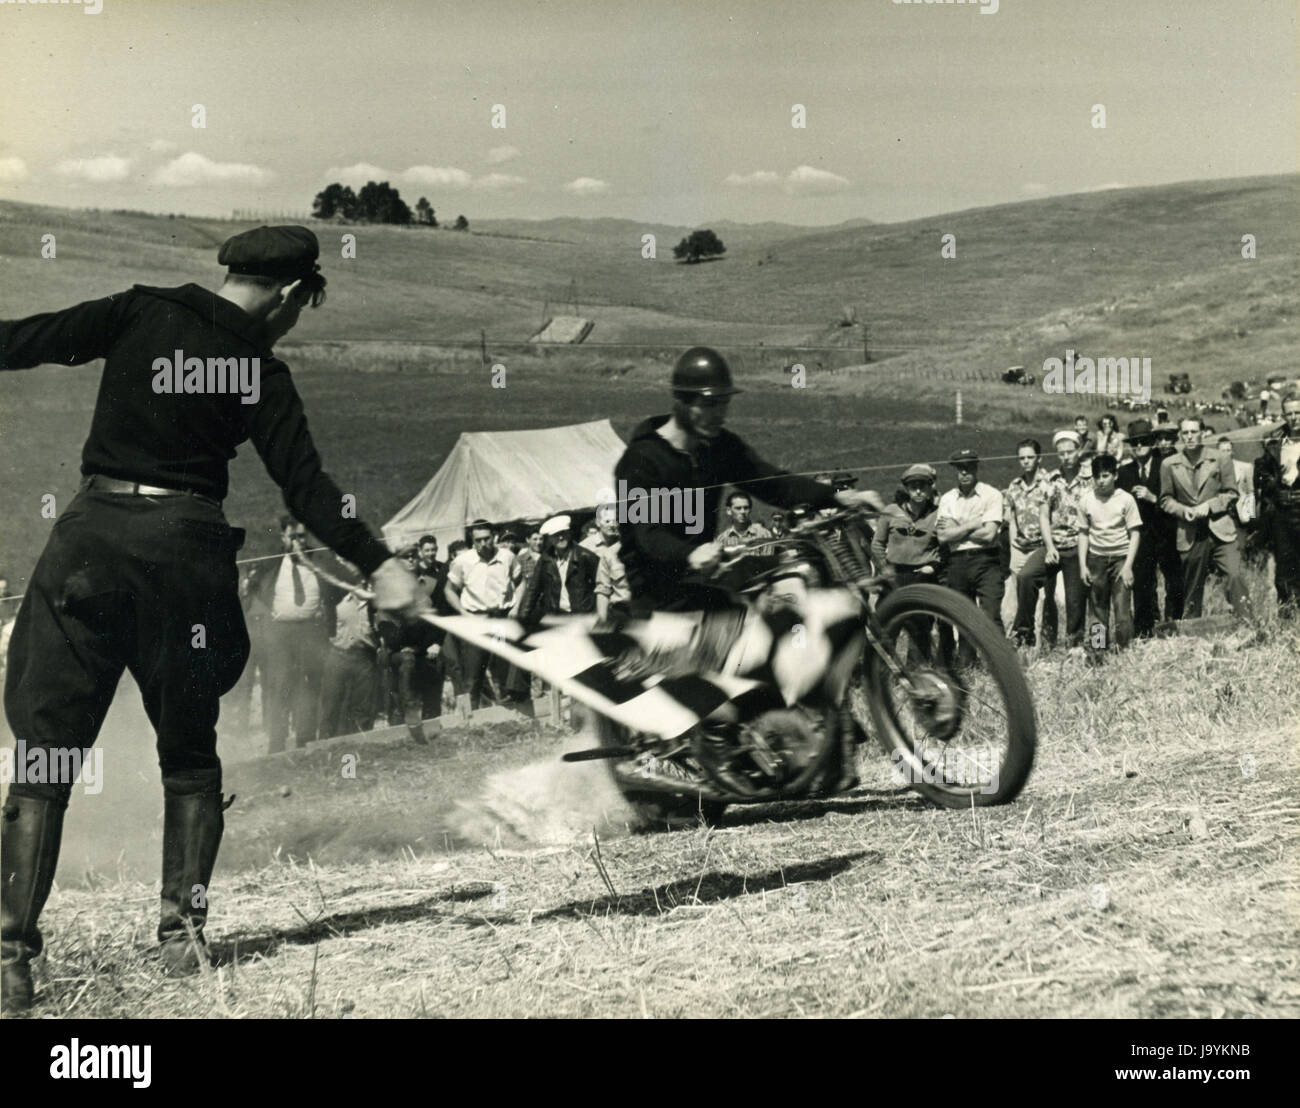 Santa Clara County, April 5, 1940 - Breaking the starting tape at the beginning of the Motorcycle Hill Climb. Stock Photo